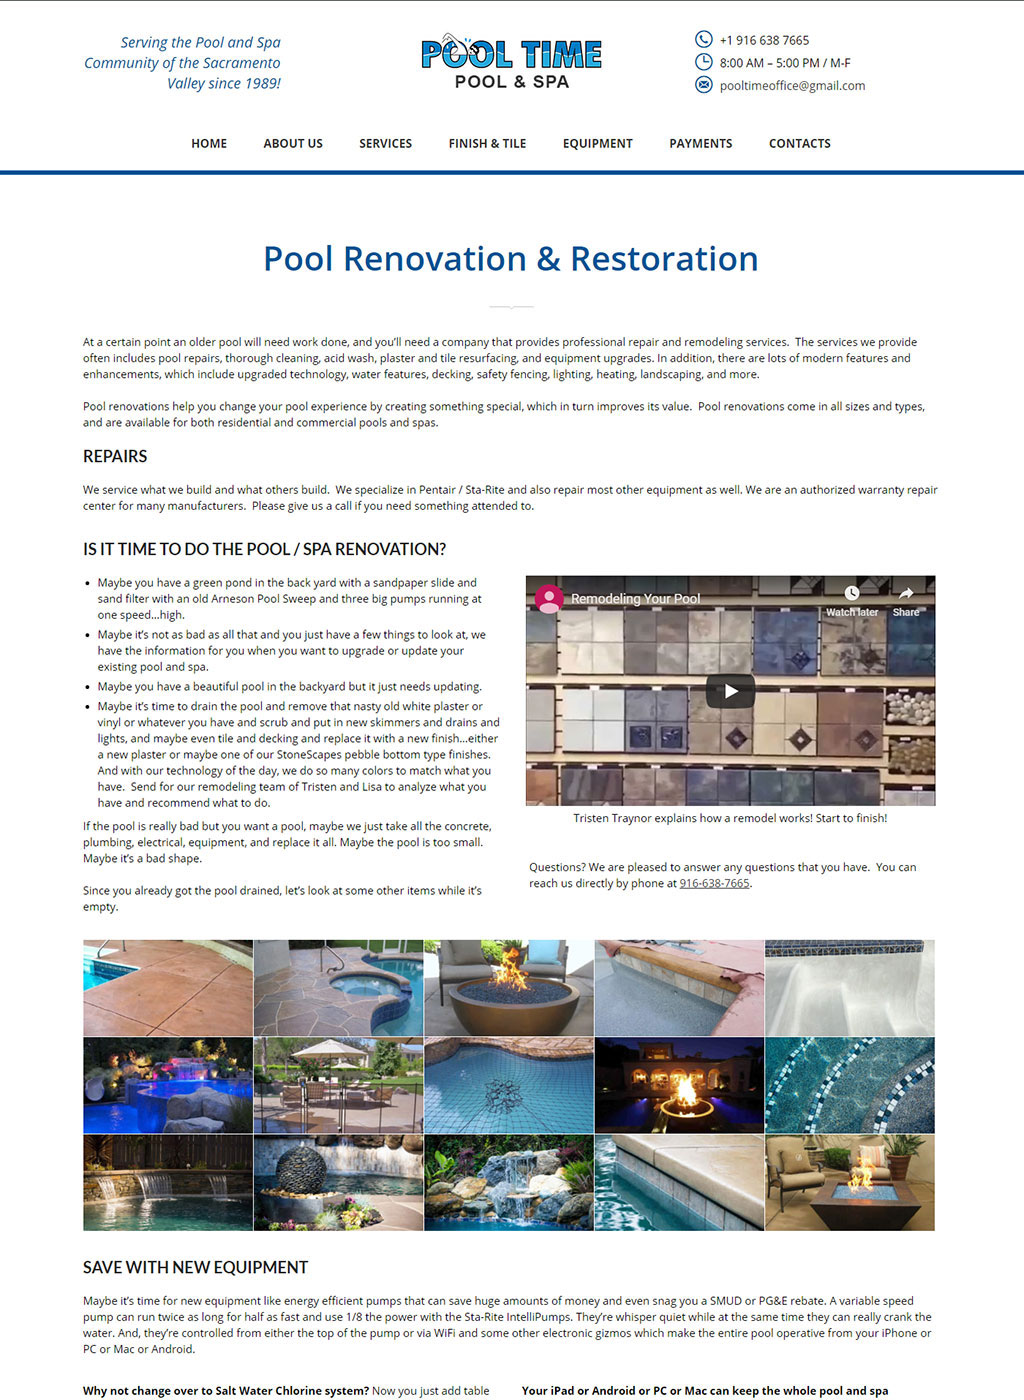 Pool renovation and restoration page developed for Sacramento pool and spa construction business